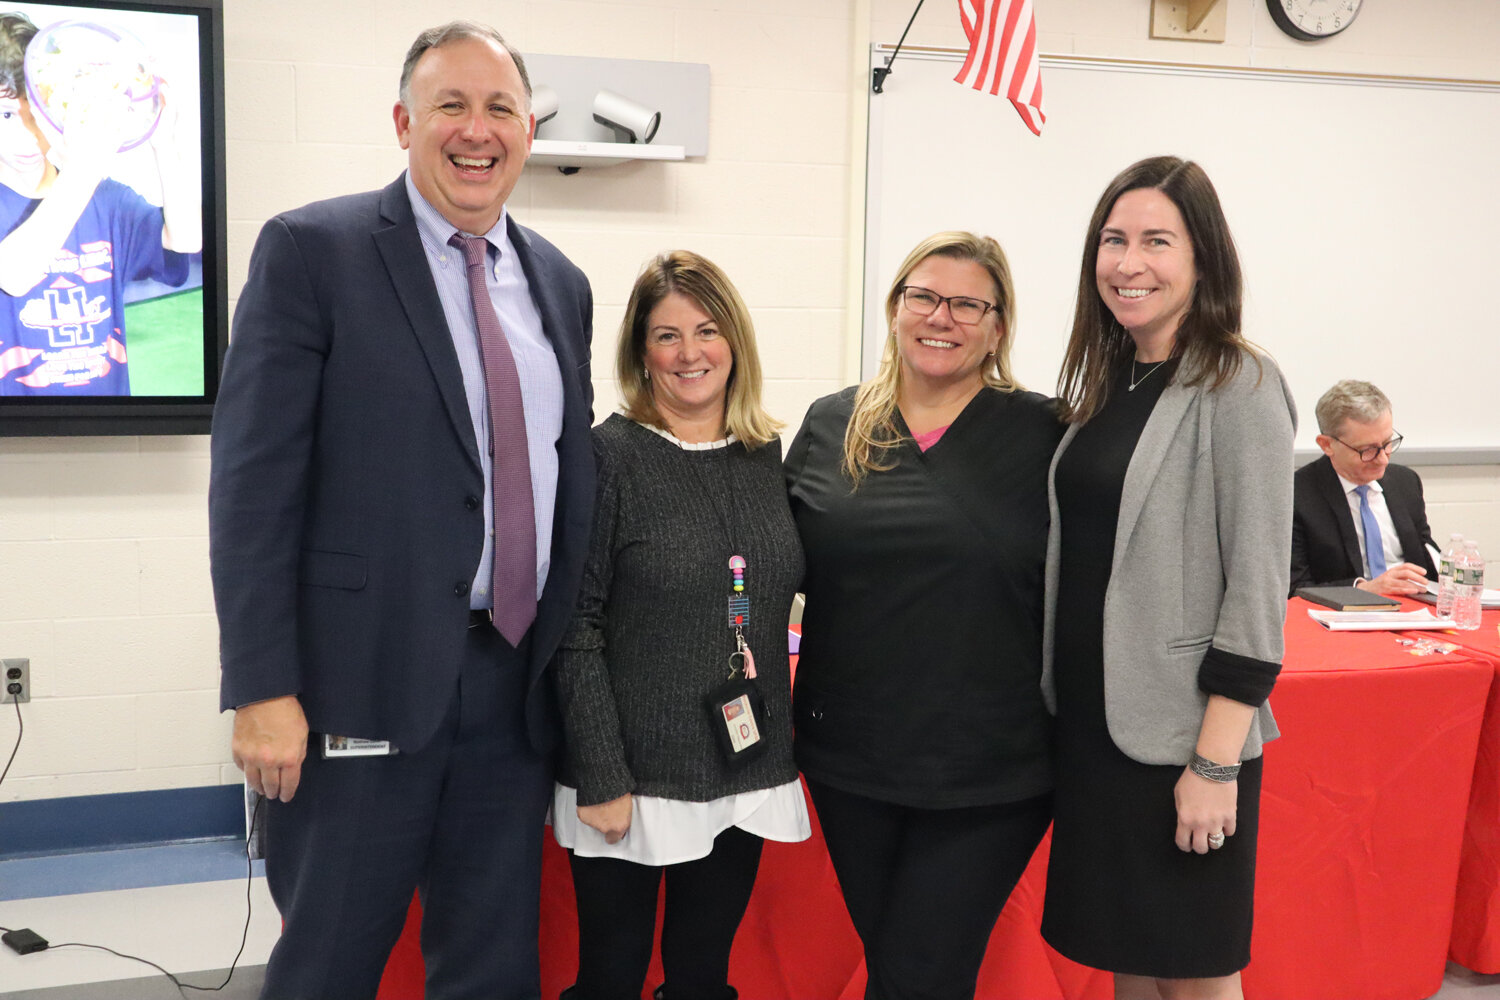 Rockville Centre School District Superintendent Matt Gaven, left, and Kelly Barry, president of the RVC Board of Education, right, express their thanks to Watson Principal Jen Pascarella and school nurse Laura Lanning for taking swift action to help save a person’s life.